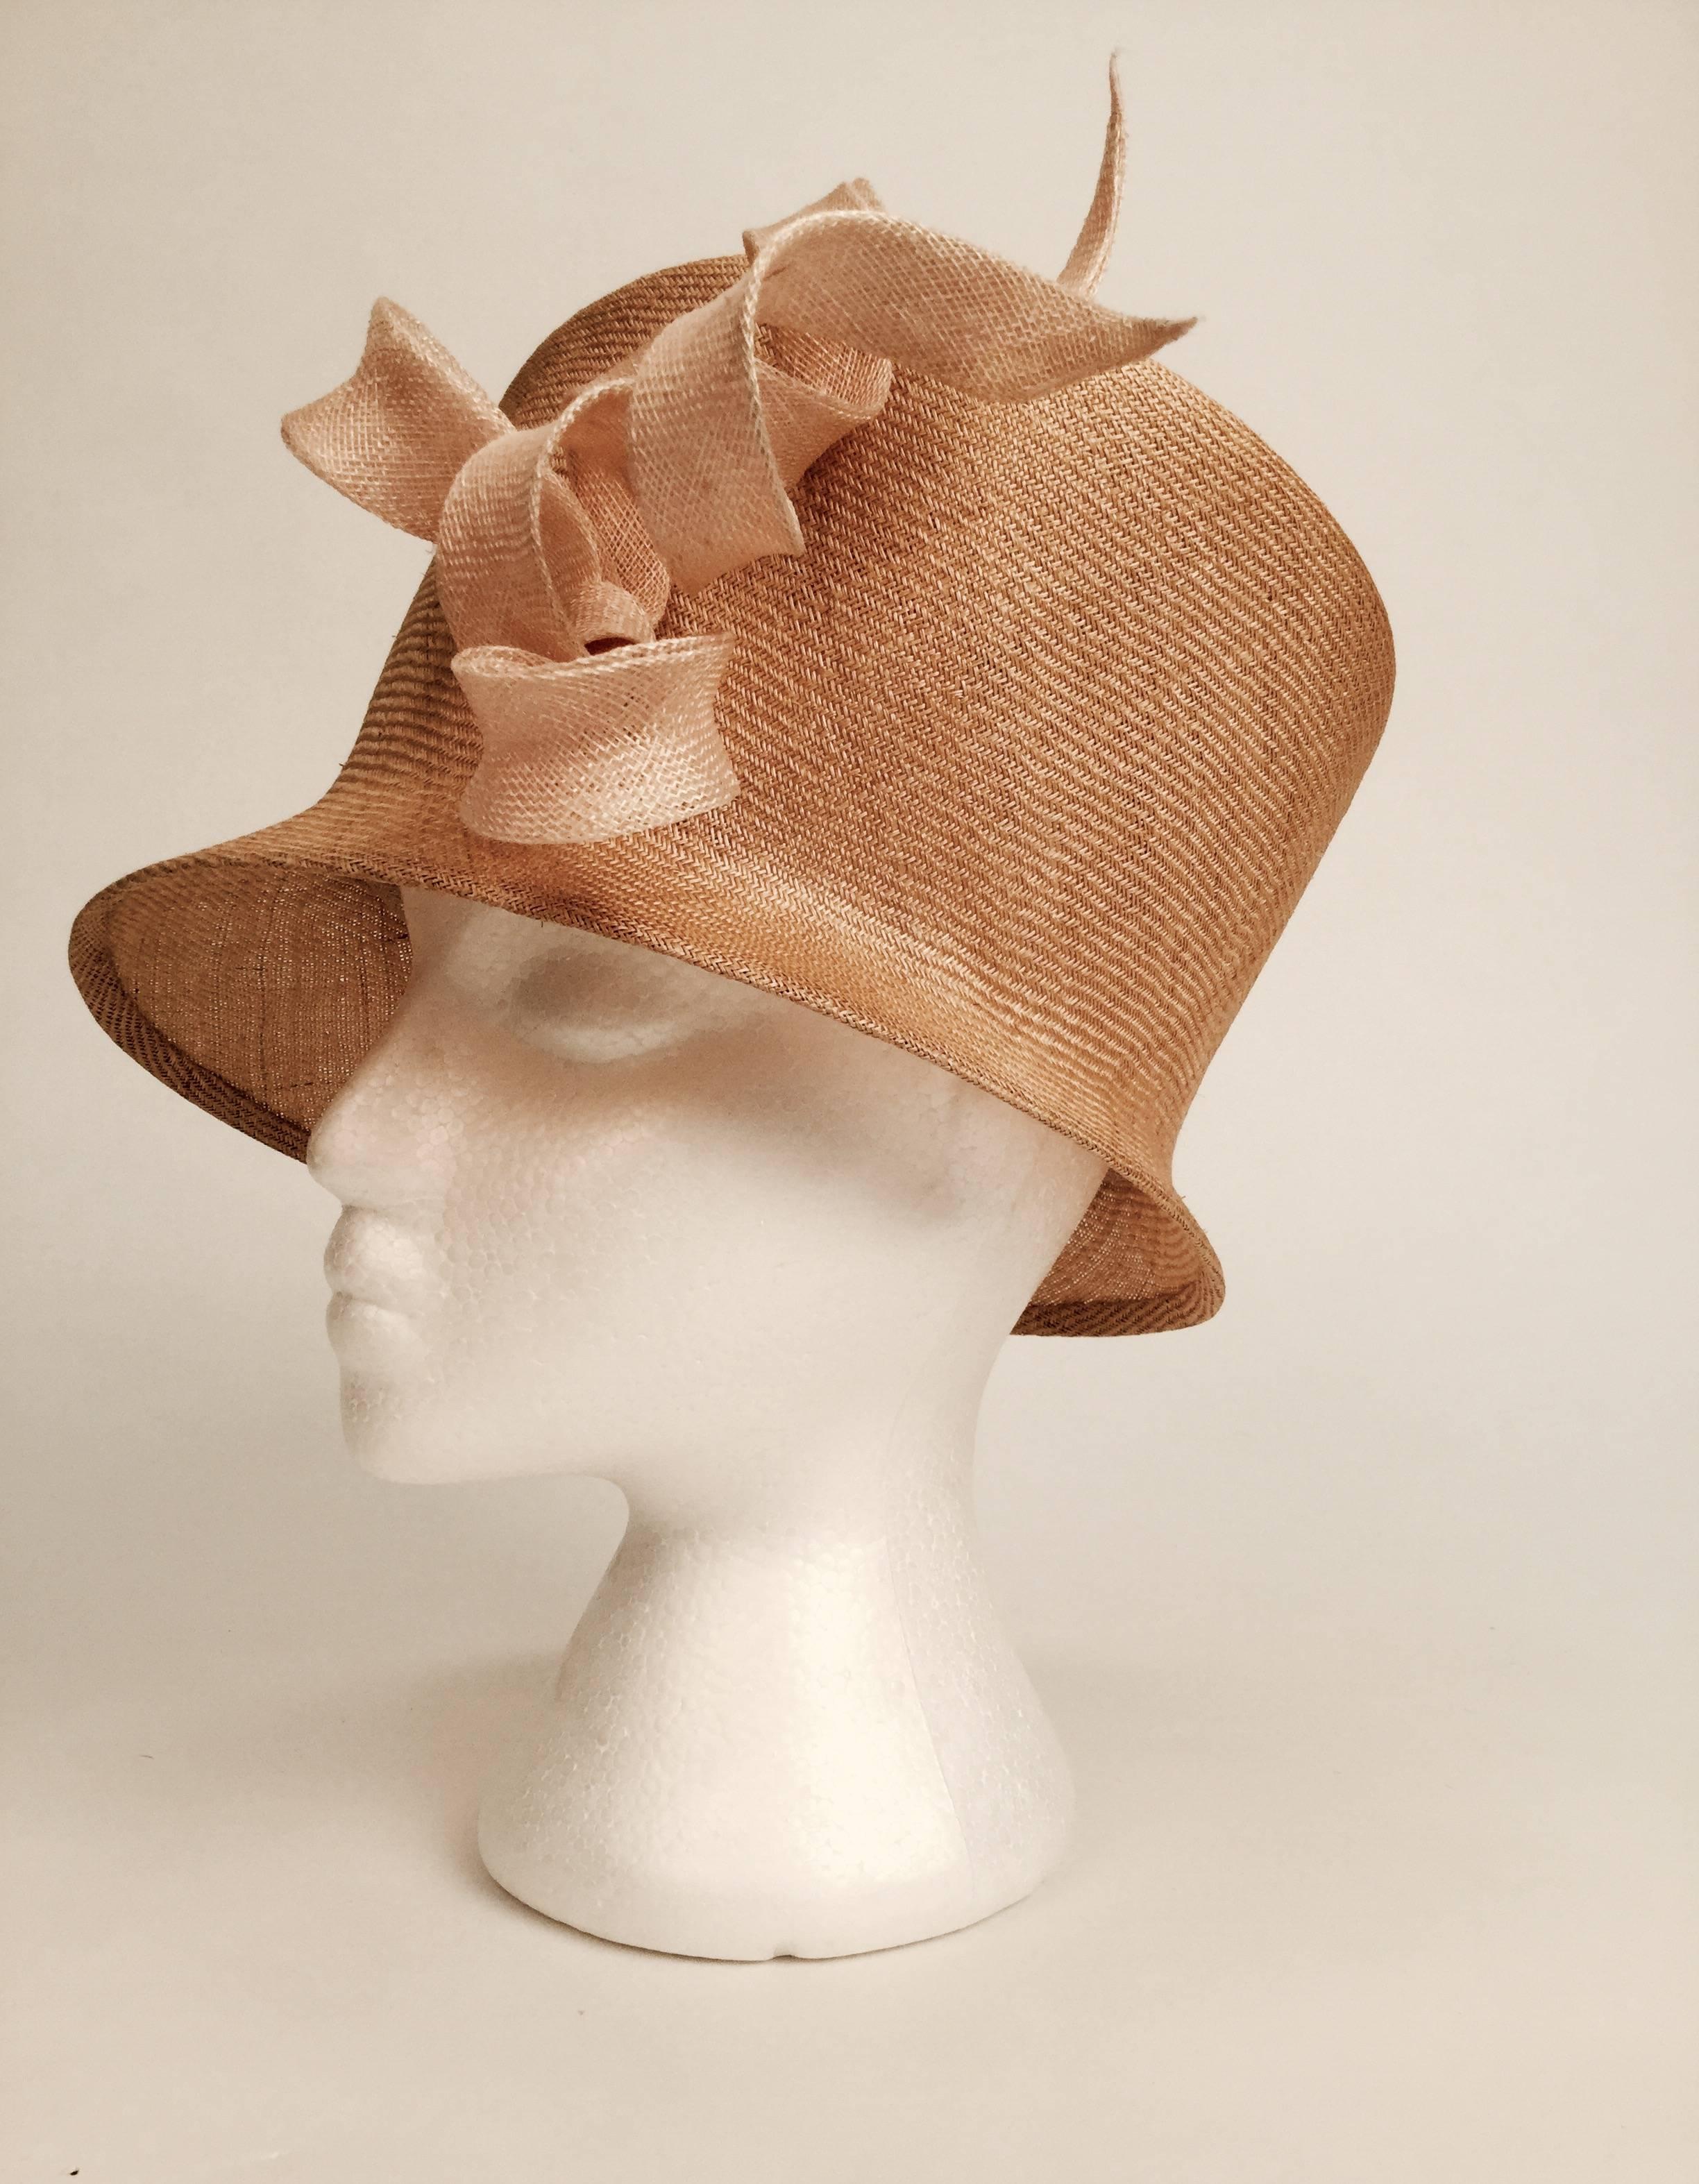 Philip Treacy is known all over the world for his exceptional millinery work. Royalty and celebrities flock to wear his creations. 

This beige, straw hat is one of his masterful creations -- one that has apparently never been worn.

We believe